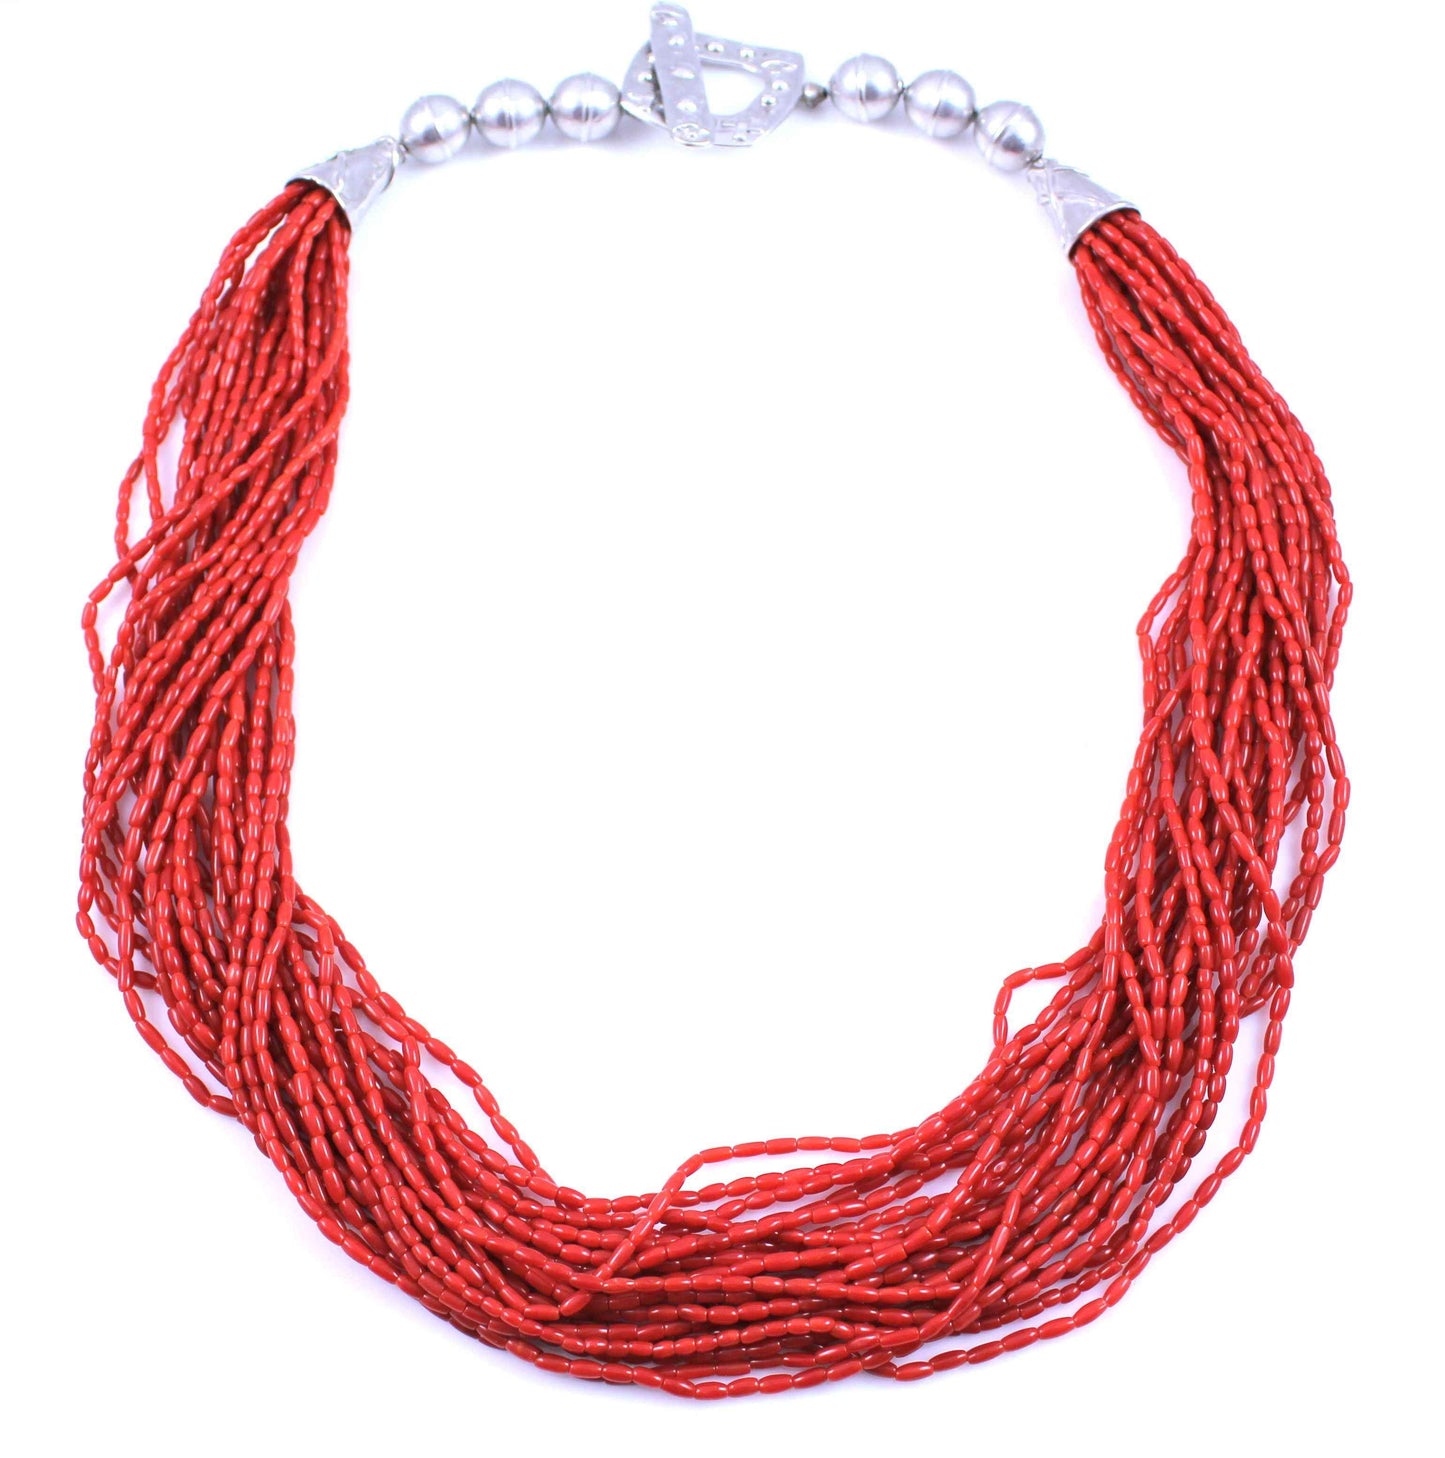 Pam Springall-Sorrel Sky Gallery-Jewelry-21 Strand Coral Necklace